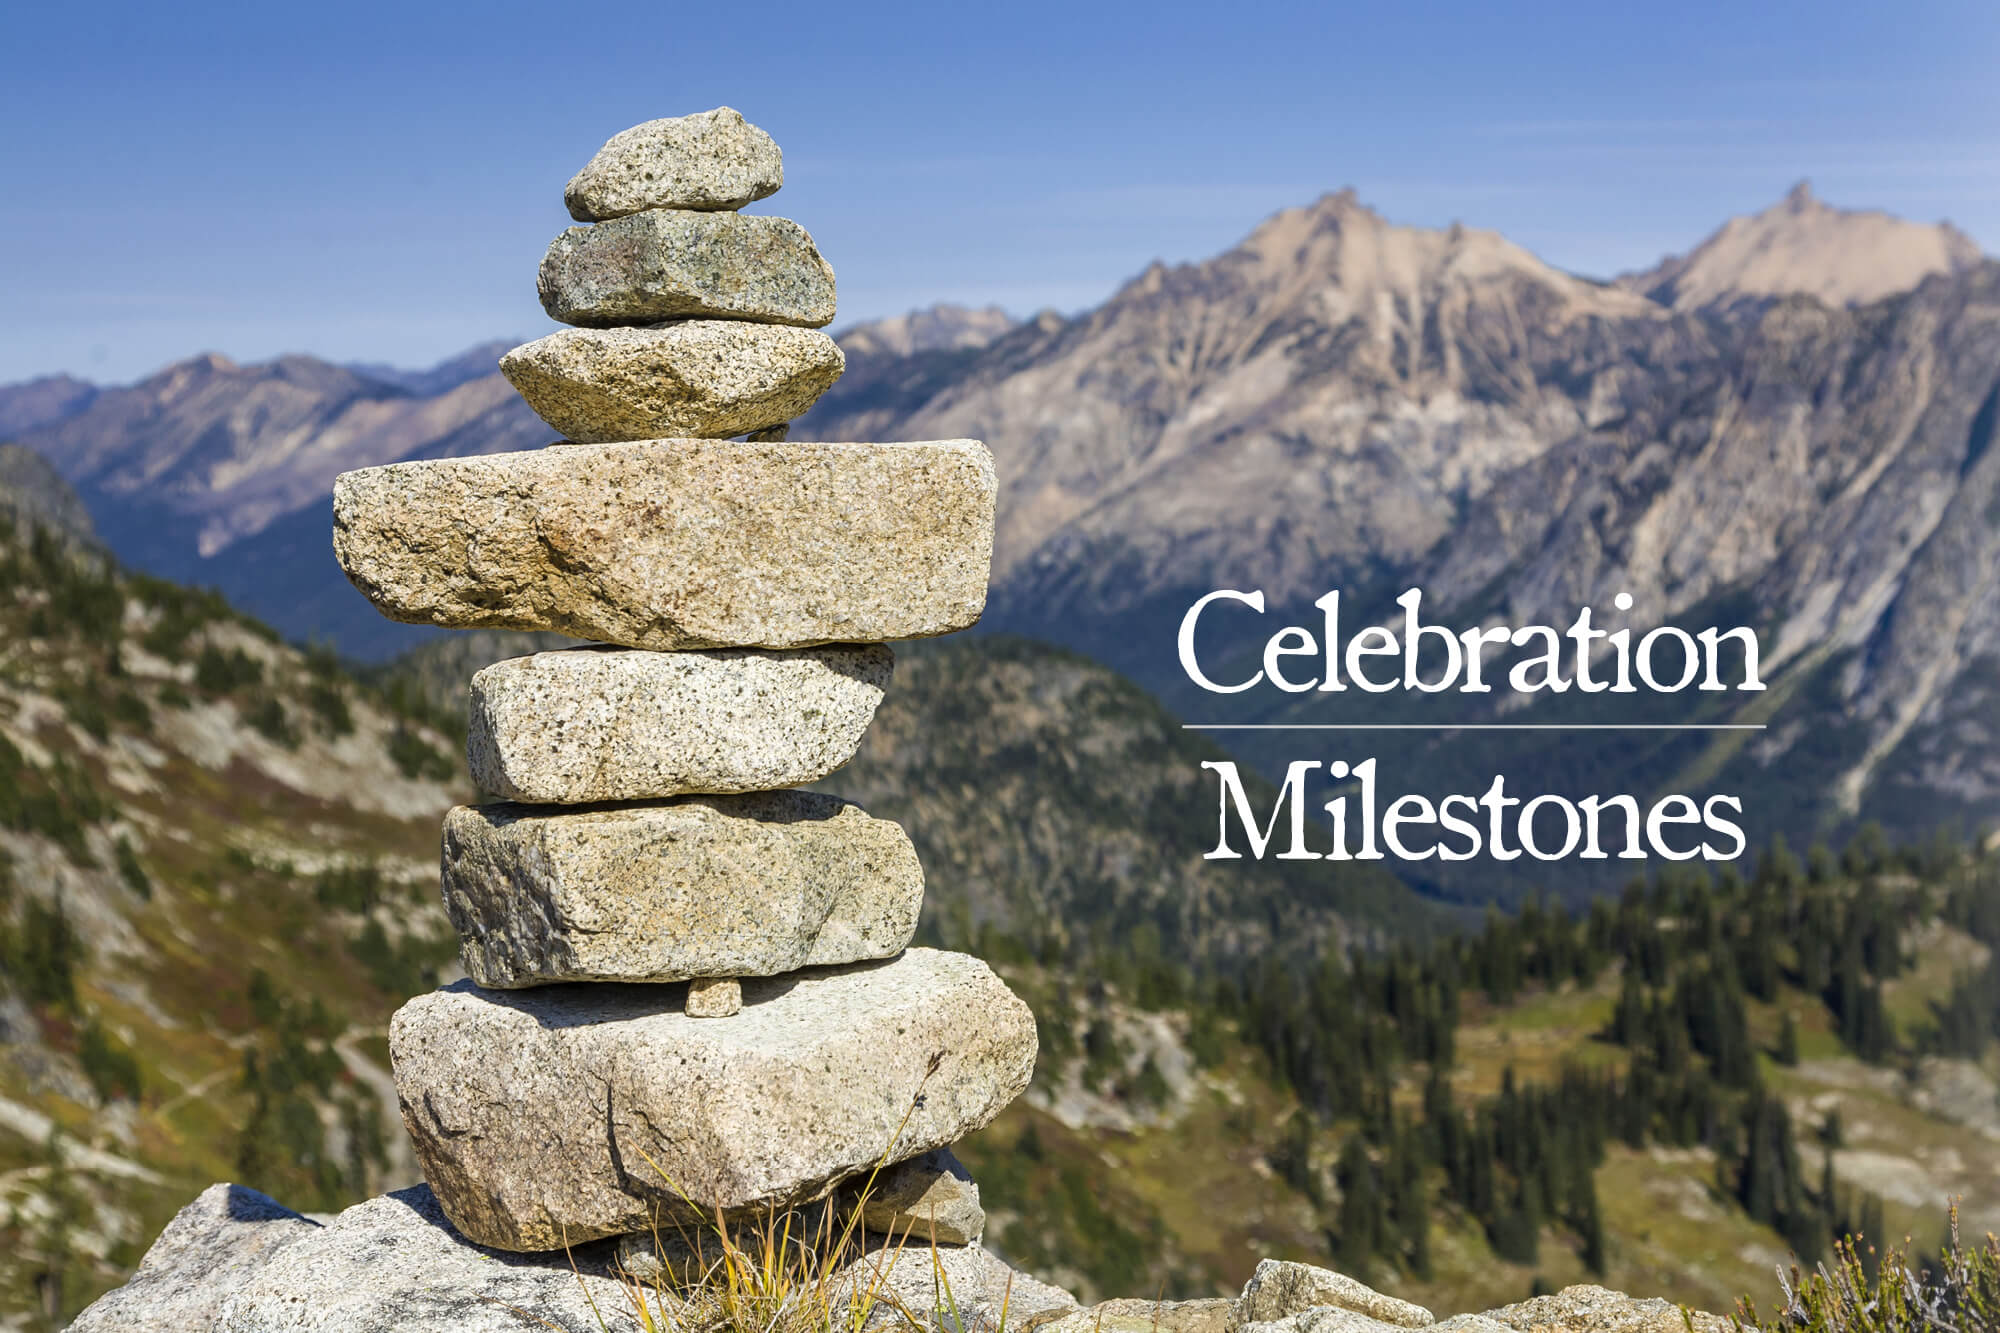 Photo of a stack of boulders with a mountain in the background with the words "Celebration Milestones."